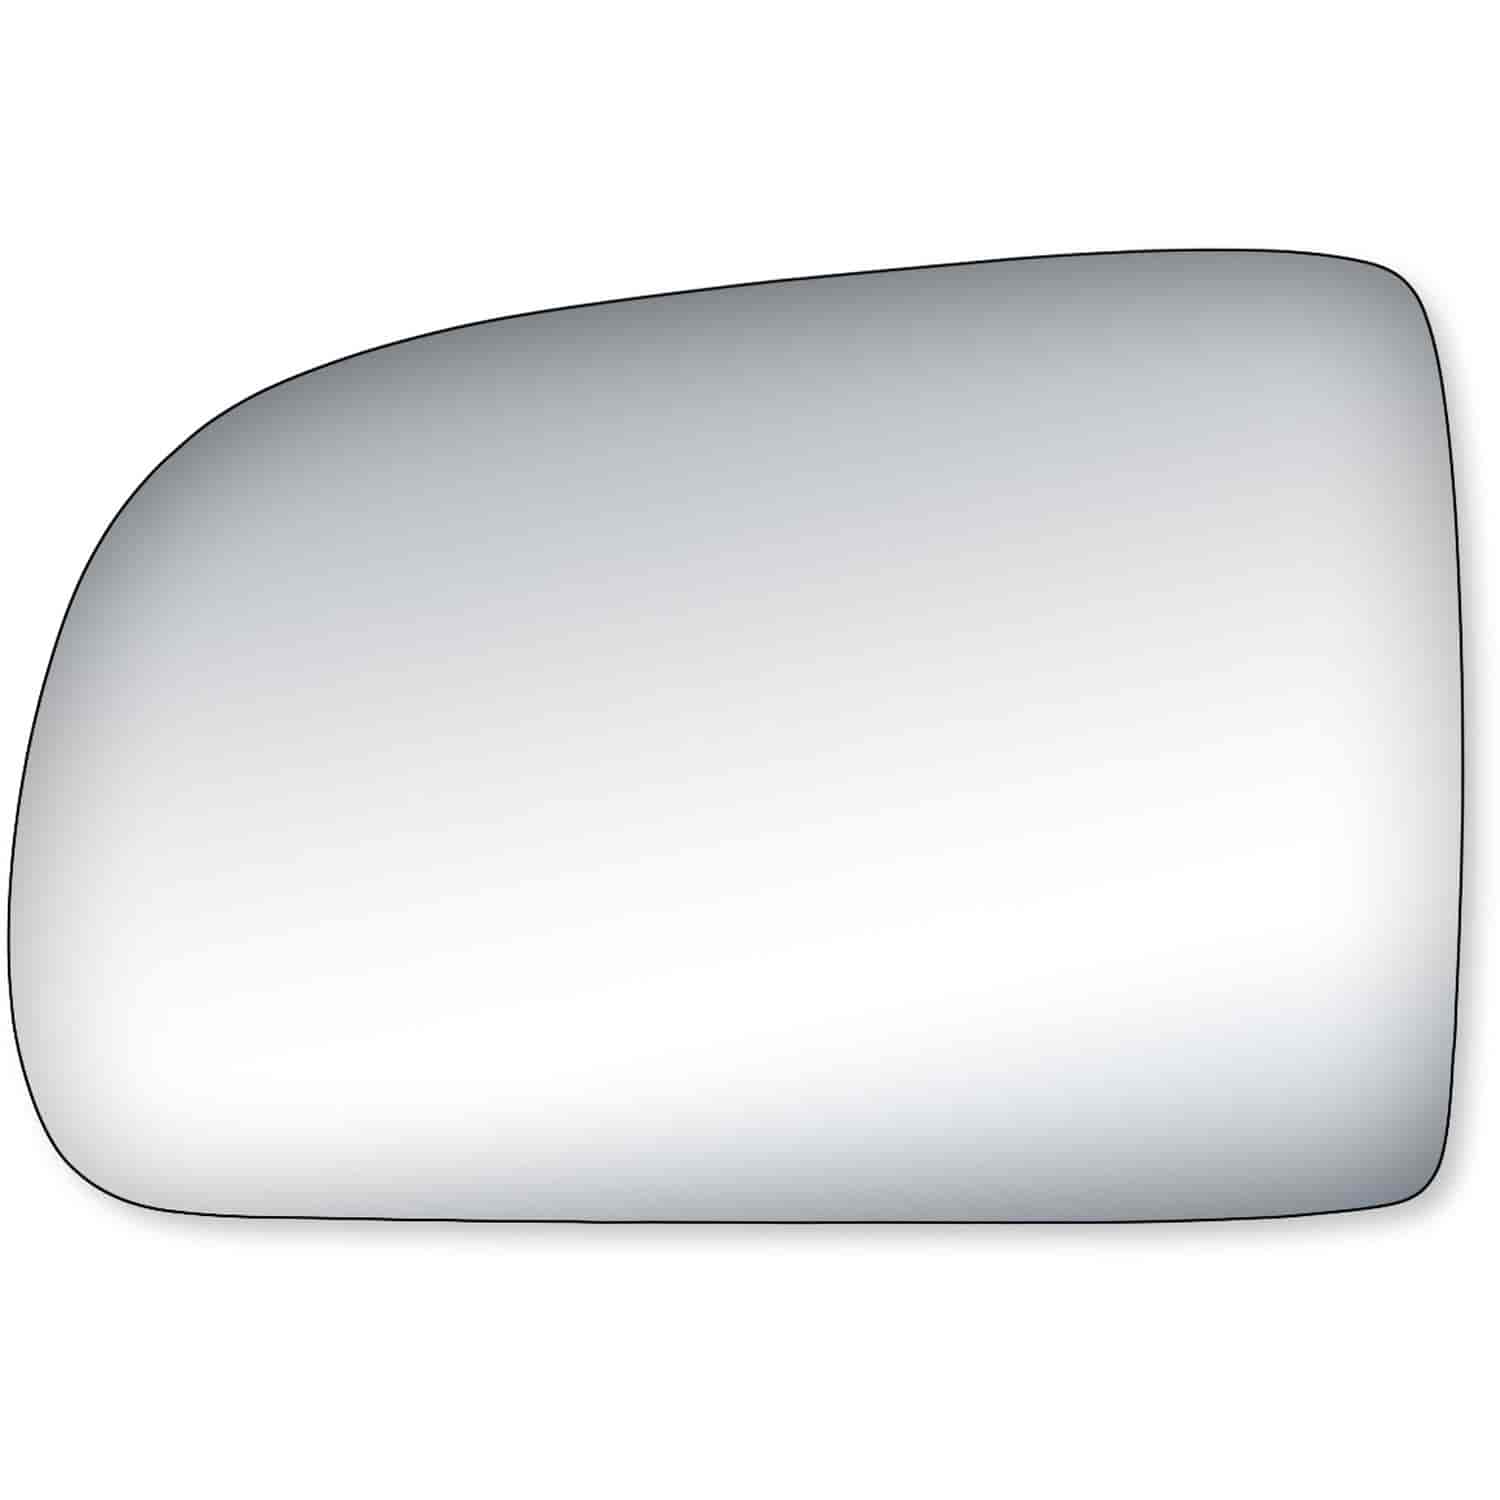 Replacement Glass for 98-03 Sienna the glass measures 4 3/4 tall by 7 5/16 wide and 8 1/8 diagonally